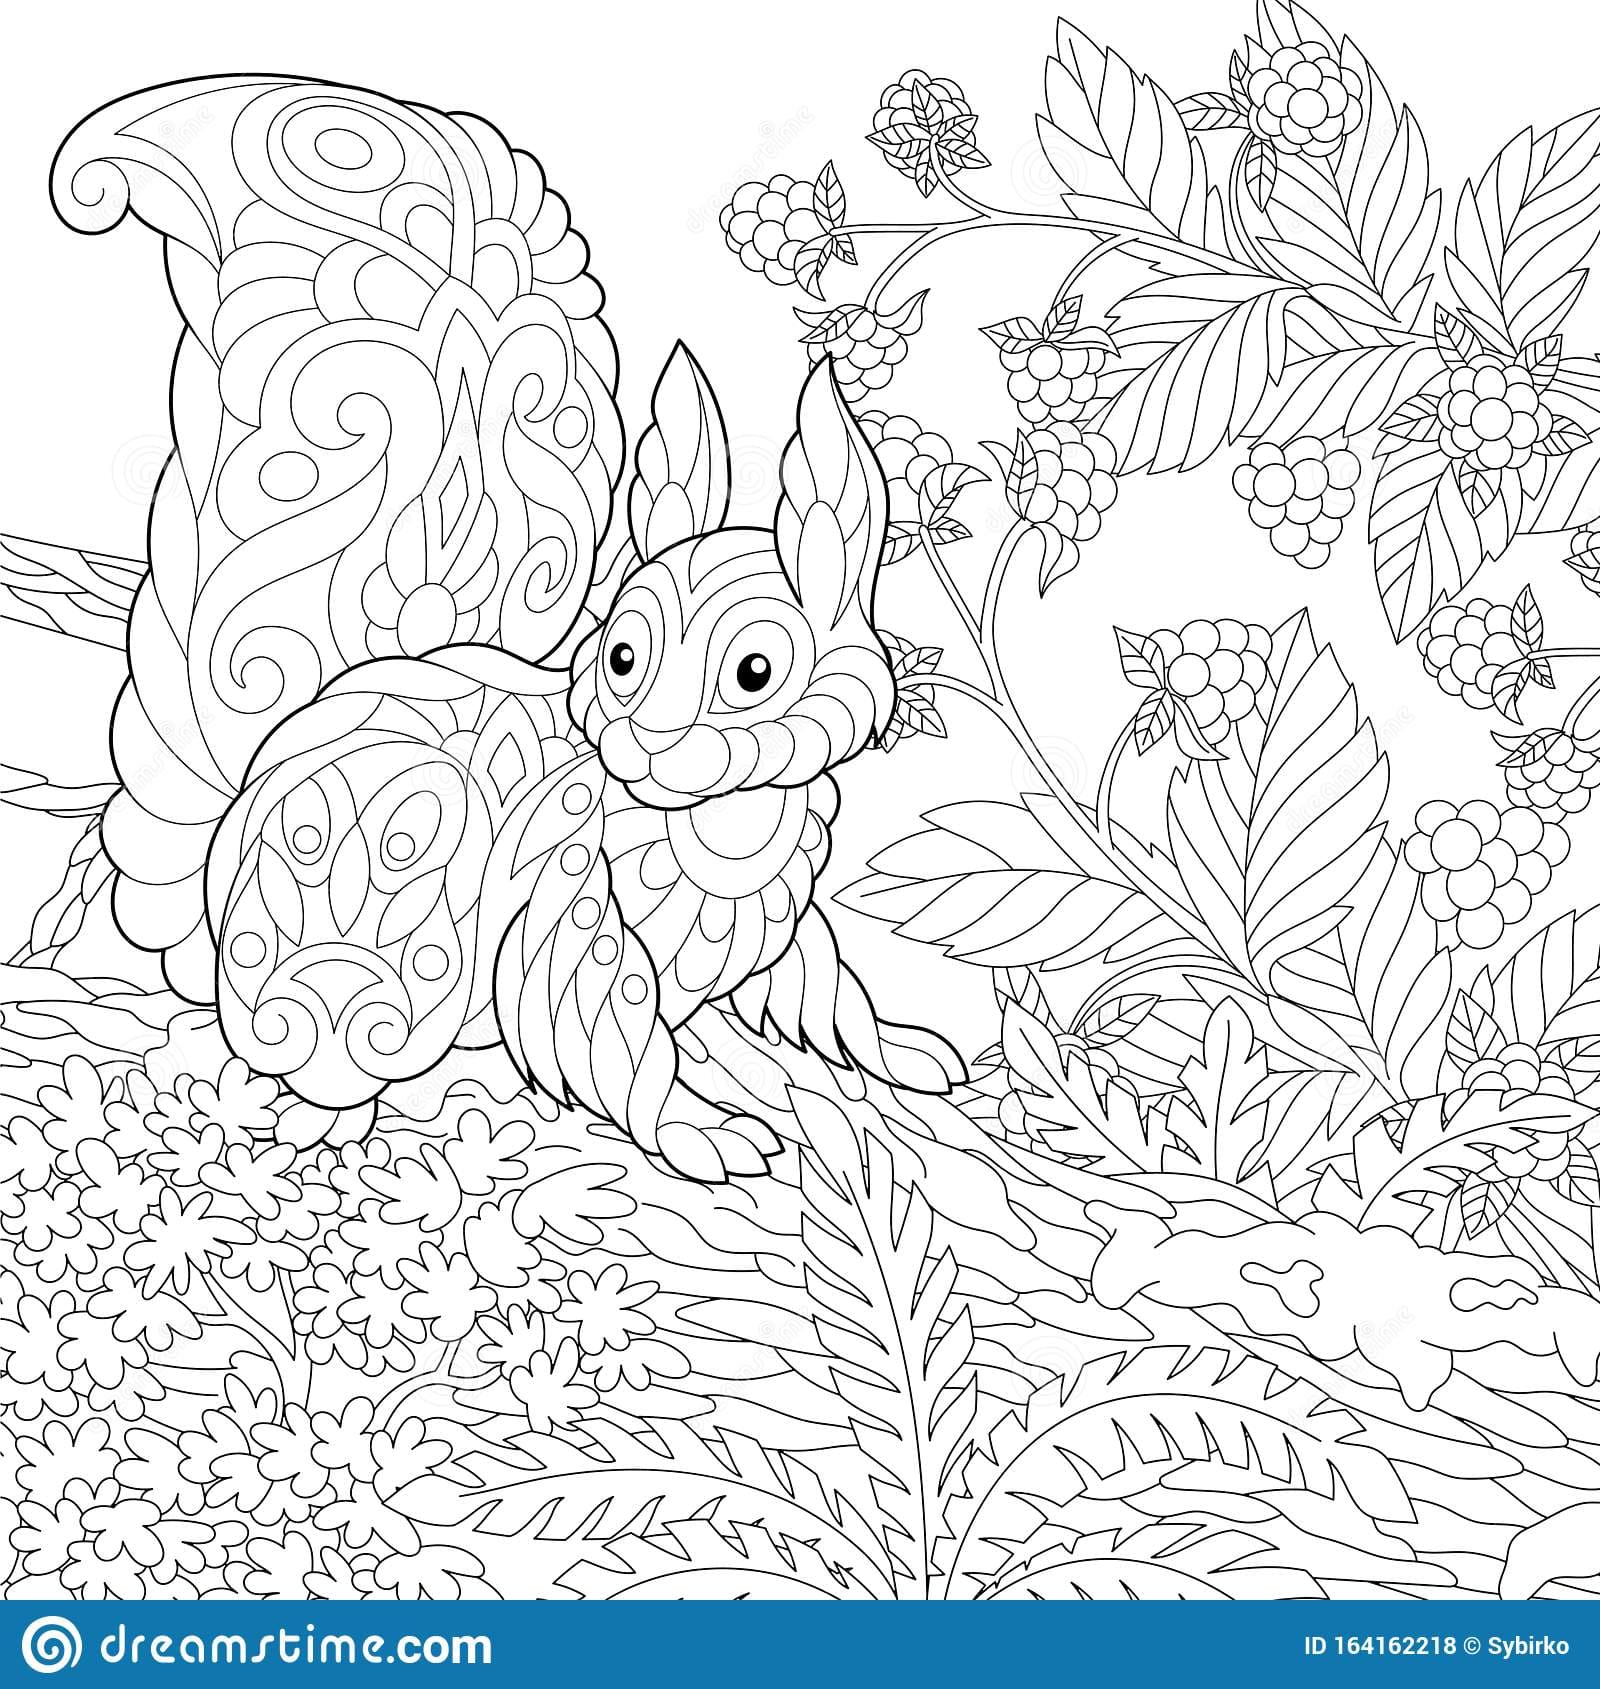 Cute Squirrel In The forest Coloring Page